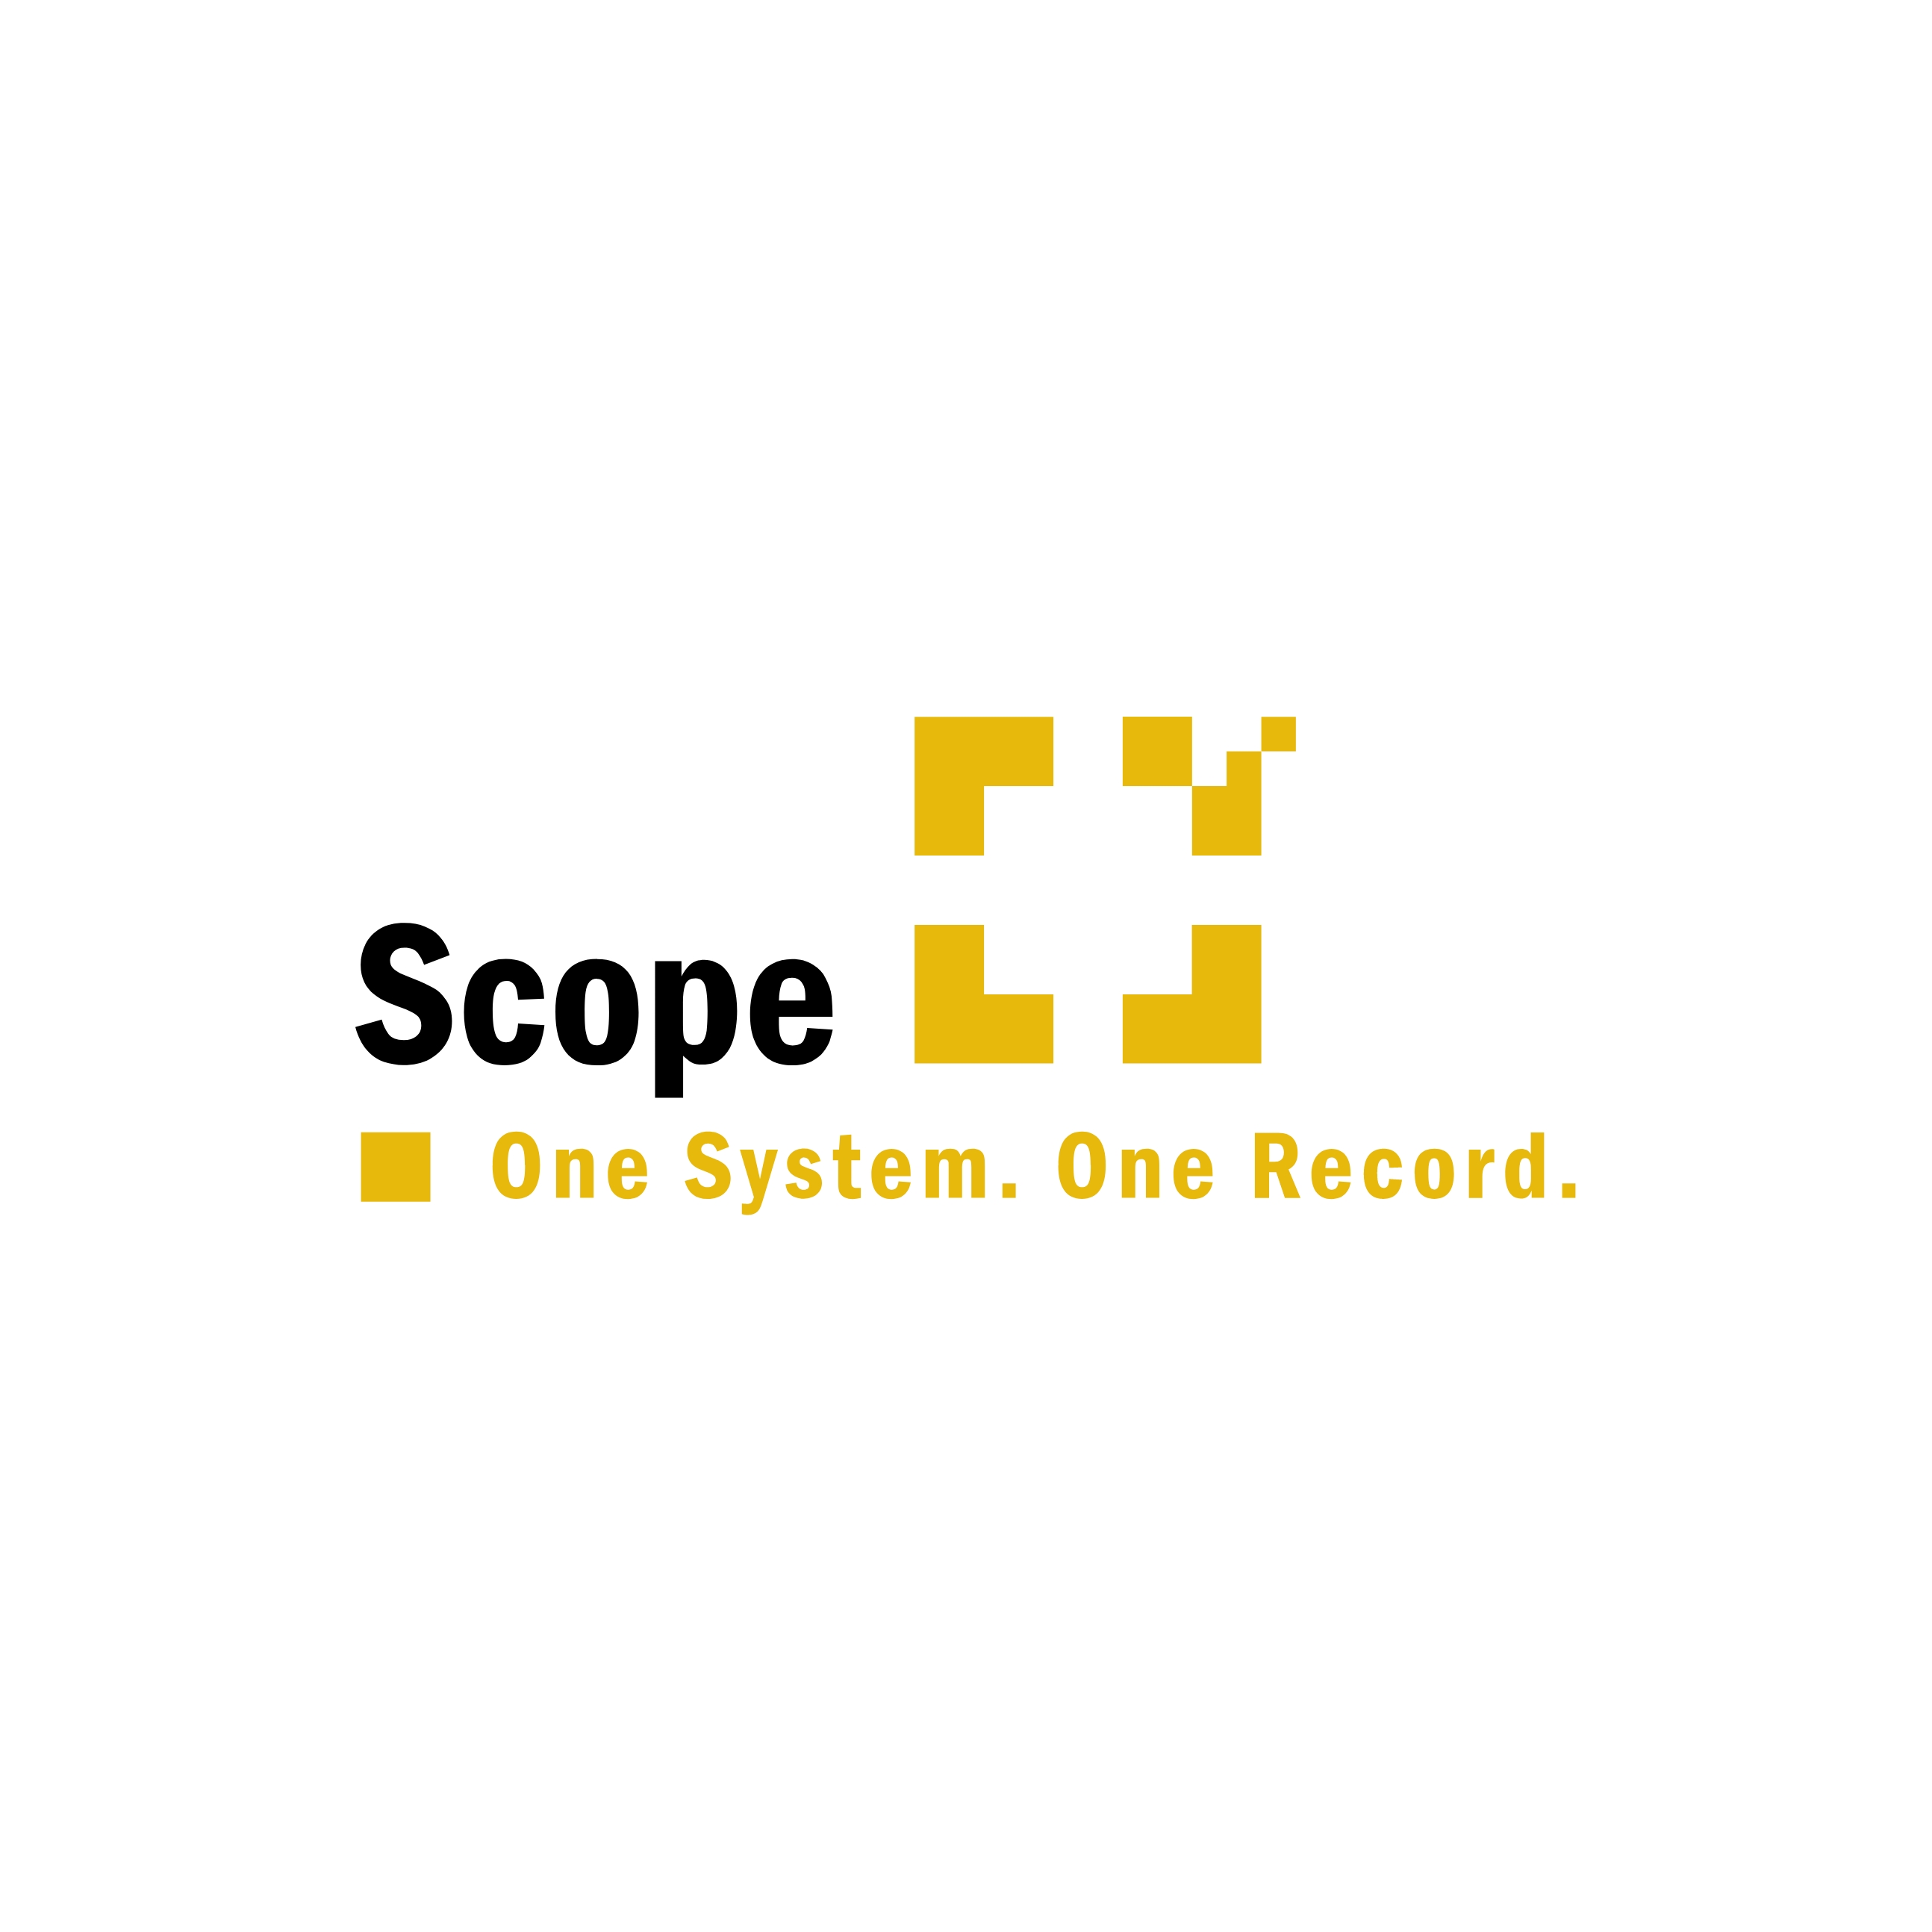 Logistics Software Scope - One System. One Record.